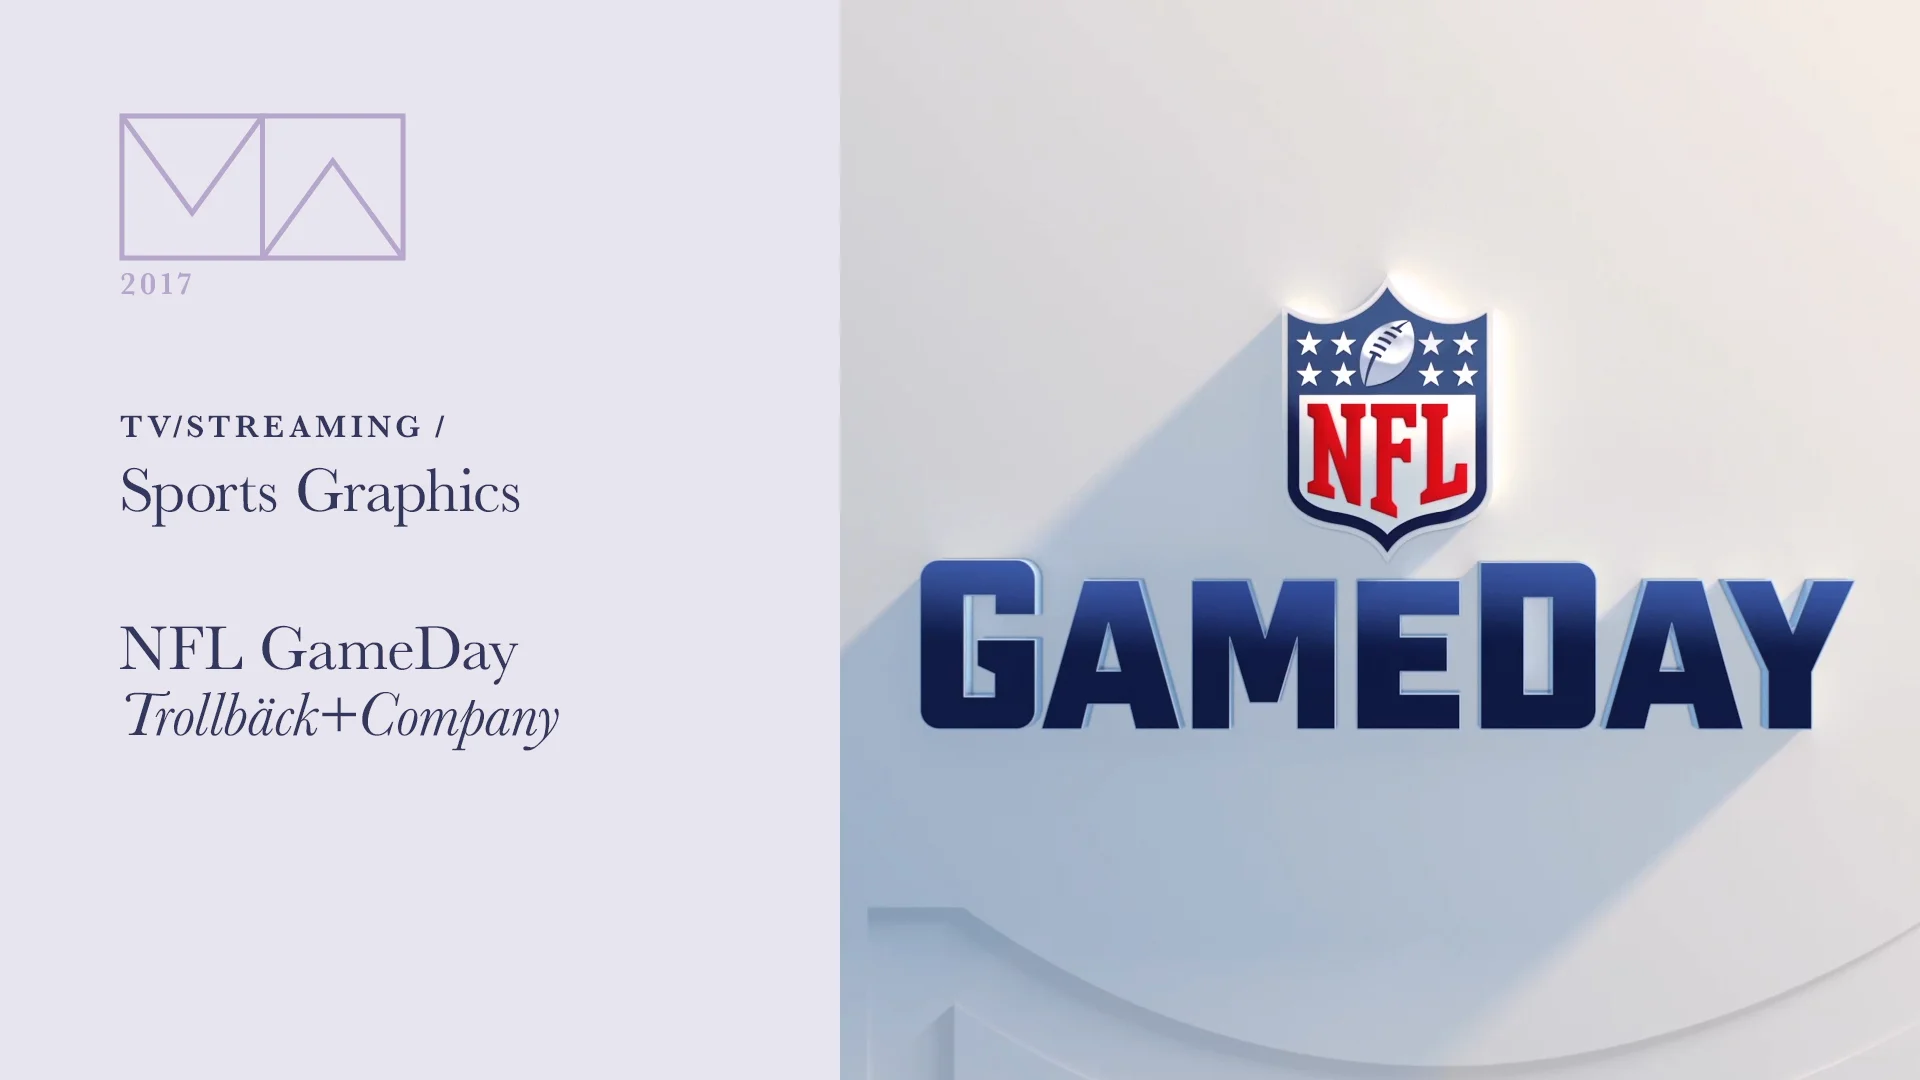 2017 Motion Awards > TV / Streaming > Sports Graphics: NFL GameDay on Vimeo